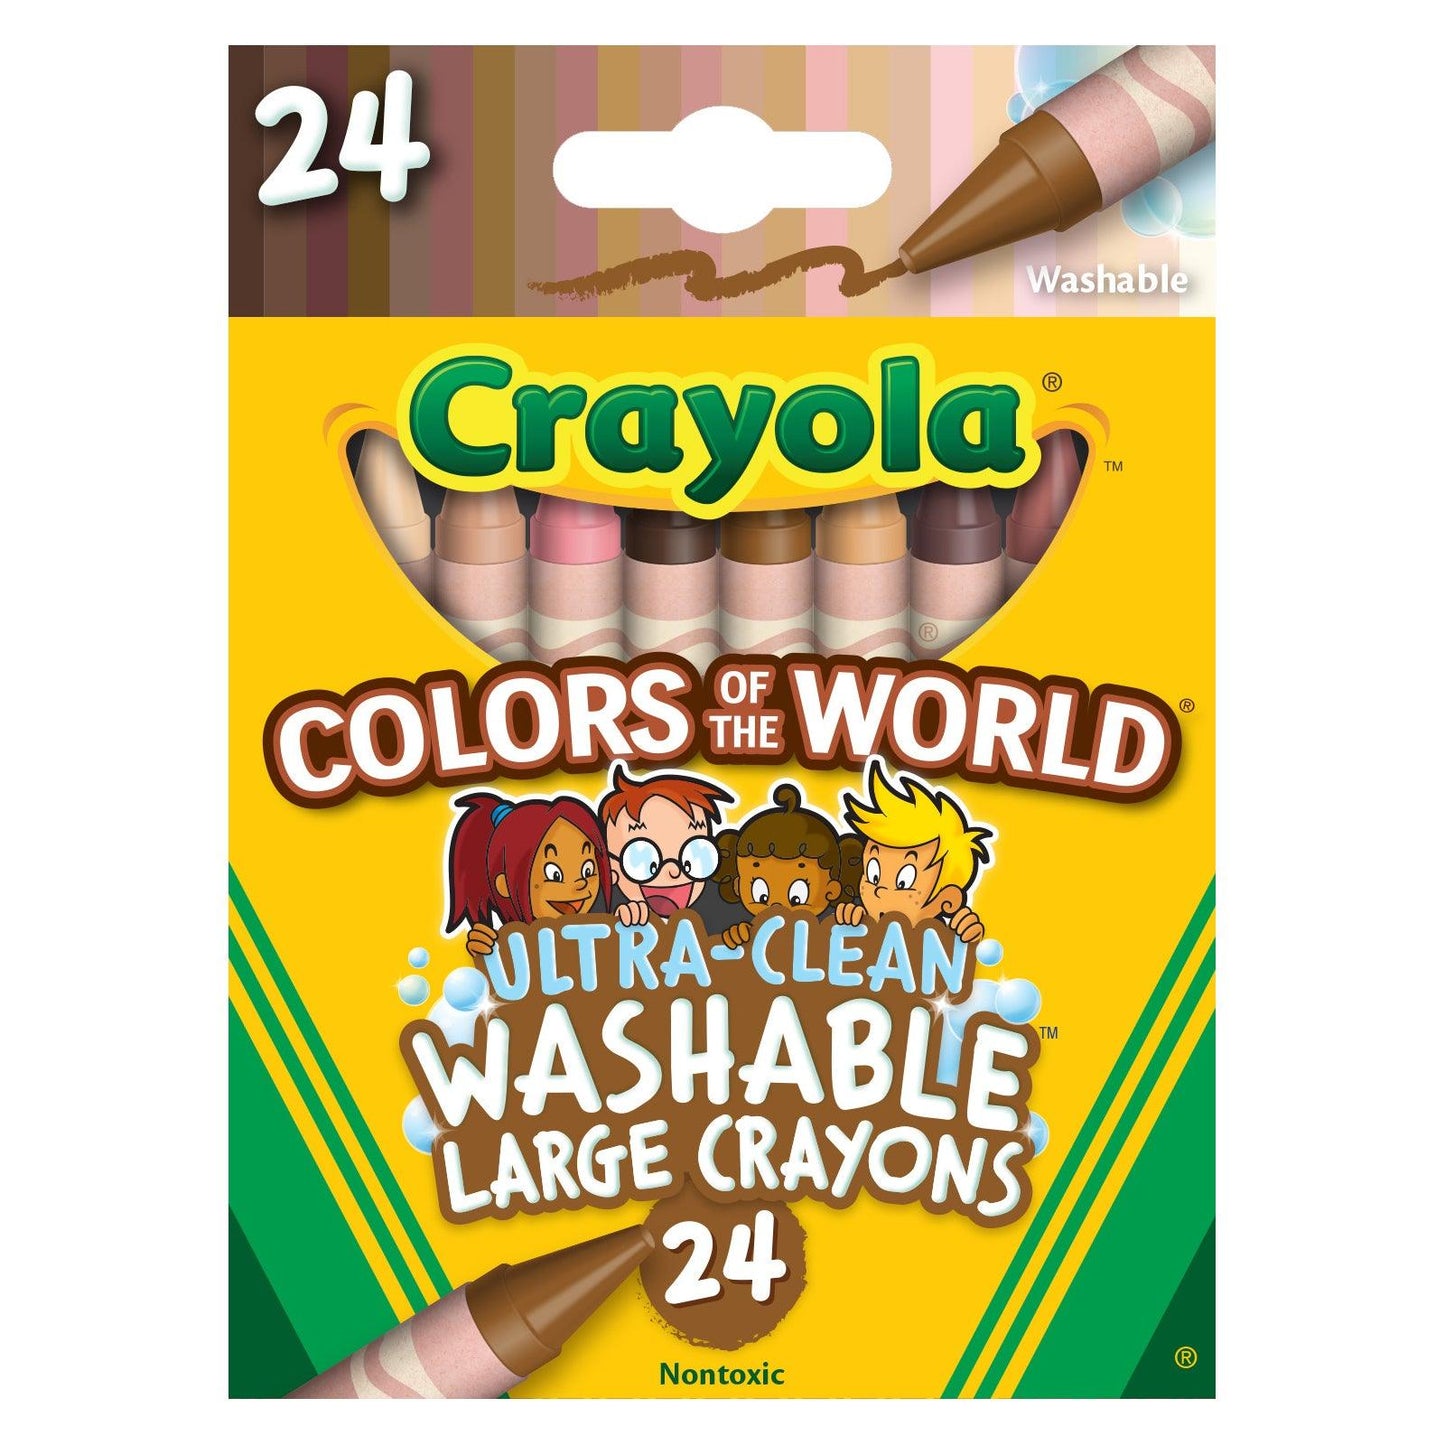 Large Crayons, Colors of the World, 24 Per Box, 3 Boxes - Loomini